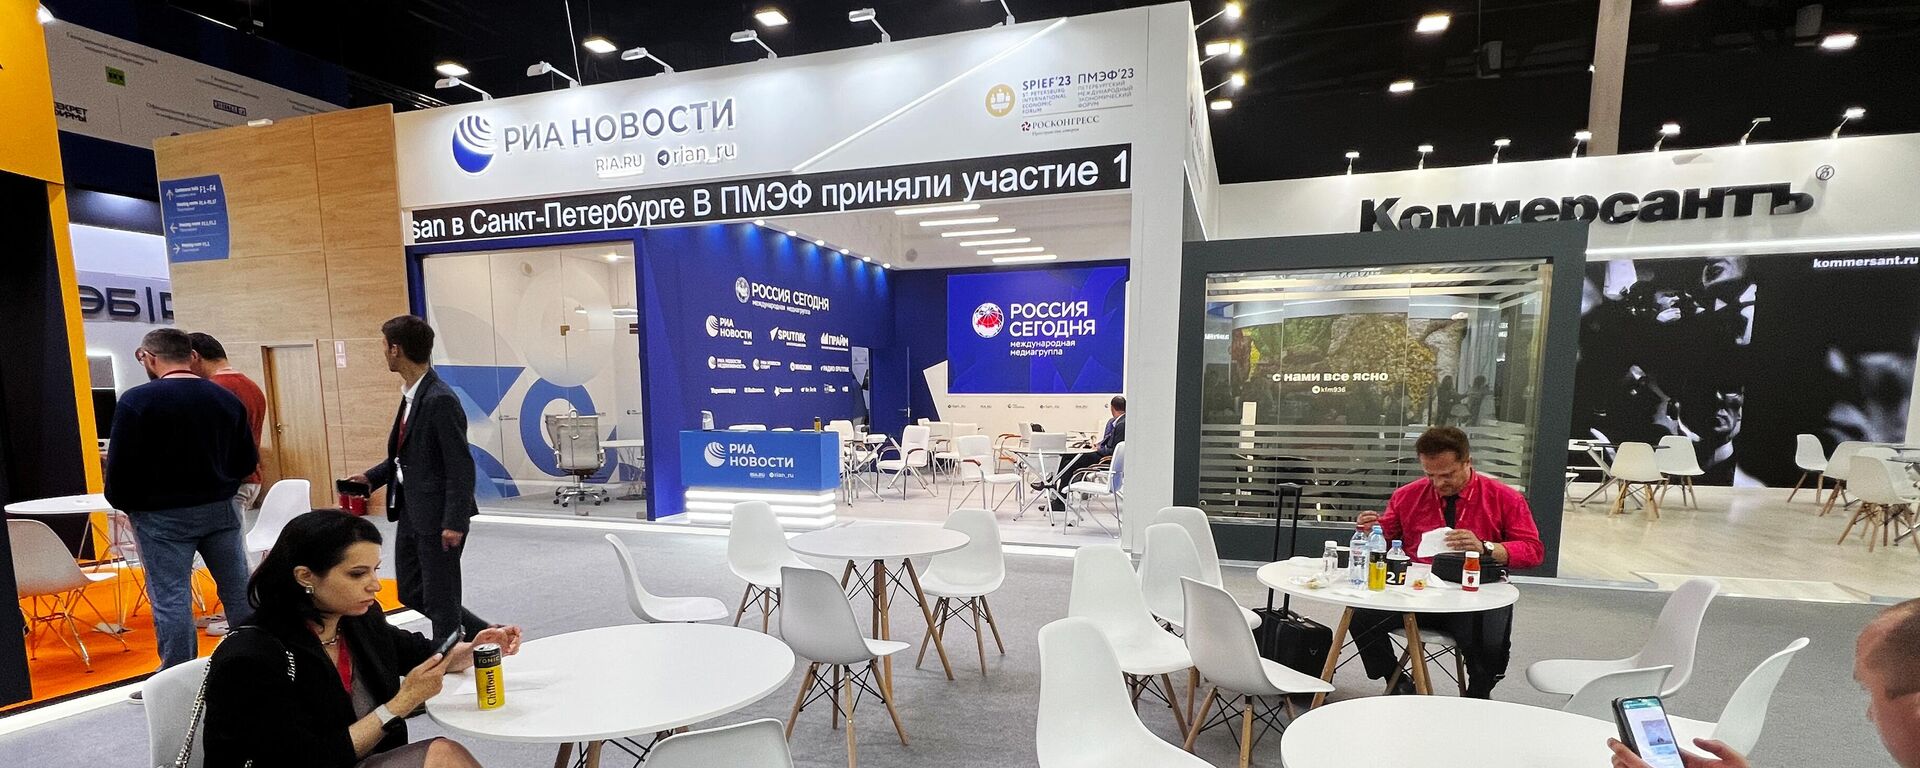 Stands of the Russian media outlets RIA Novosti and Kommersant at the SPIEF-2023. - Sputnik Africa, 1920, 25.07.2023